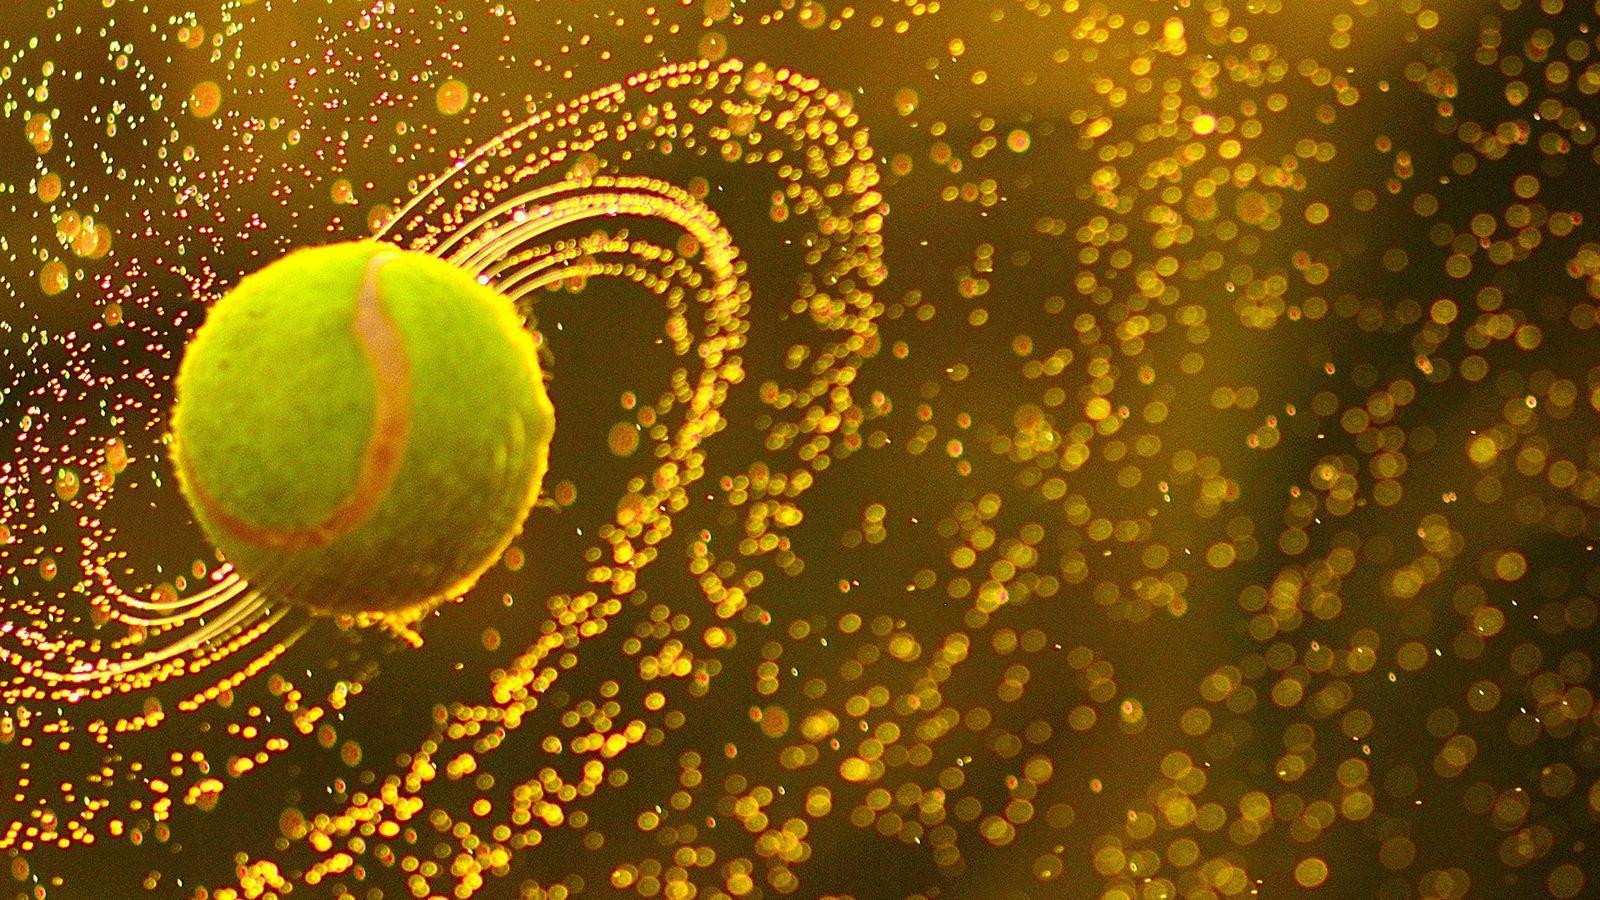 A tennis ball is flying through the air with a golden background. - Tennis